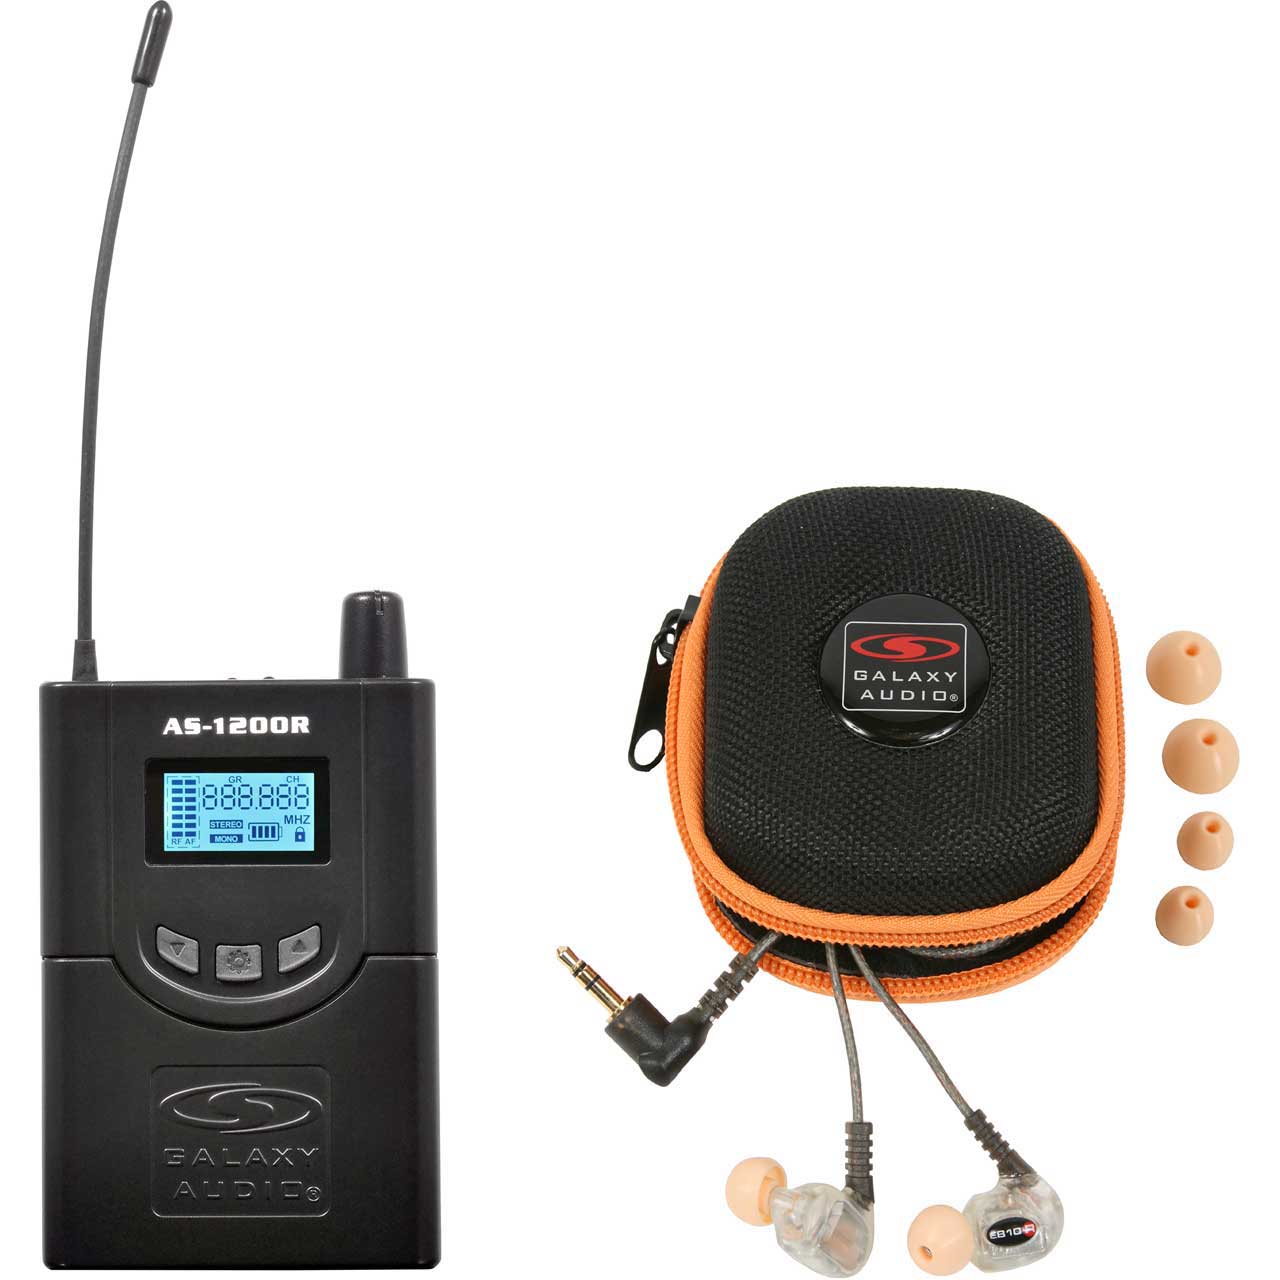 Galaxy Audio AS-1210RN 210 Channel Stereo Wireless Personal In-Ear Monitor Receiver with EB10 Earbuds - 518-542 MHz AS-1210RN